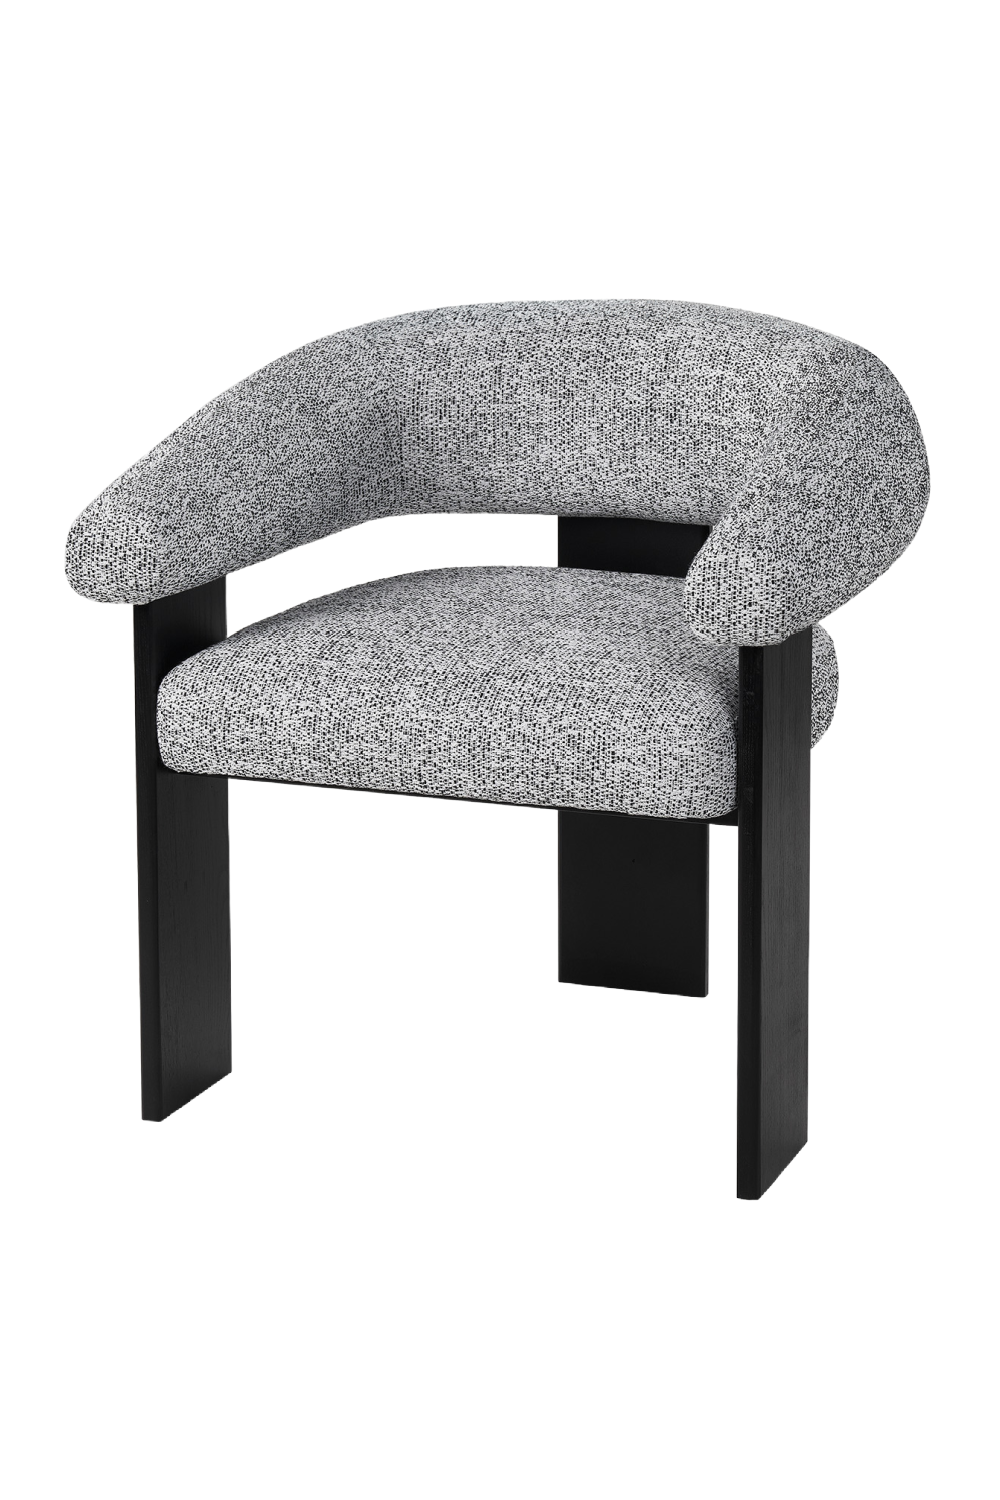 Curved Modern Occasional Chair | Liang & Eimil Kalo | Oroa.com